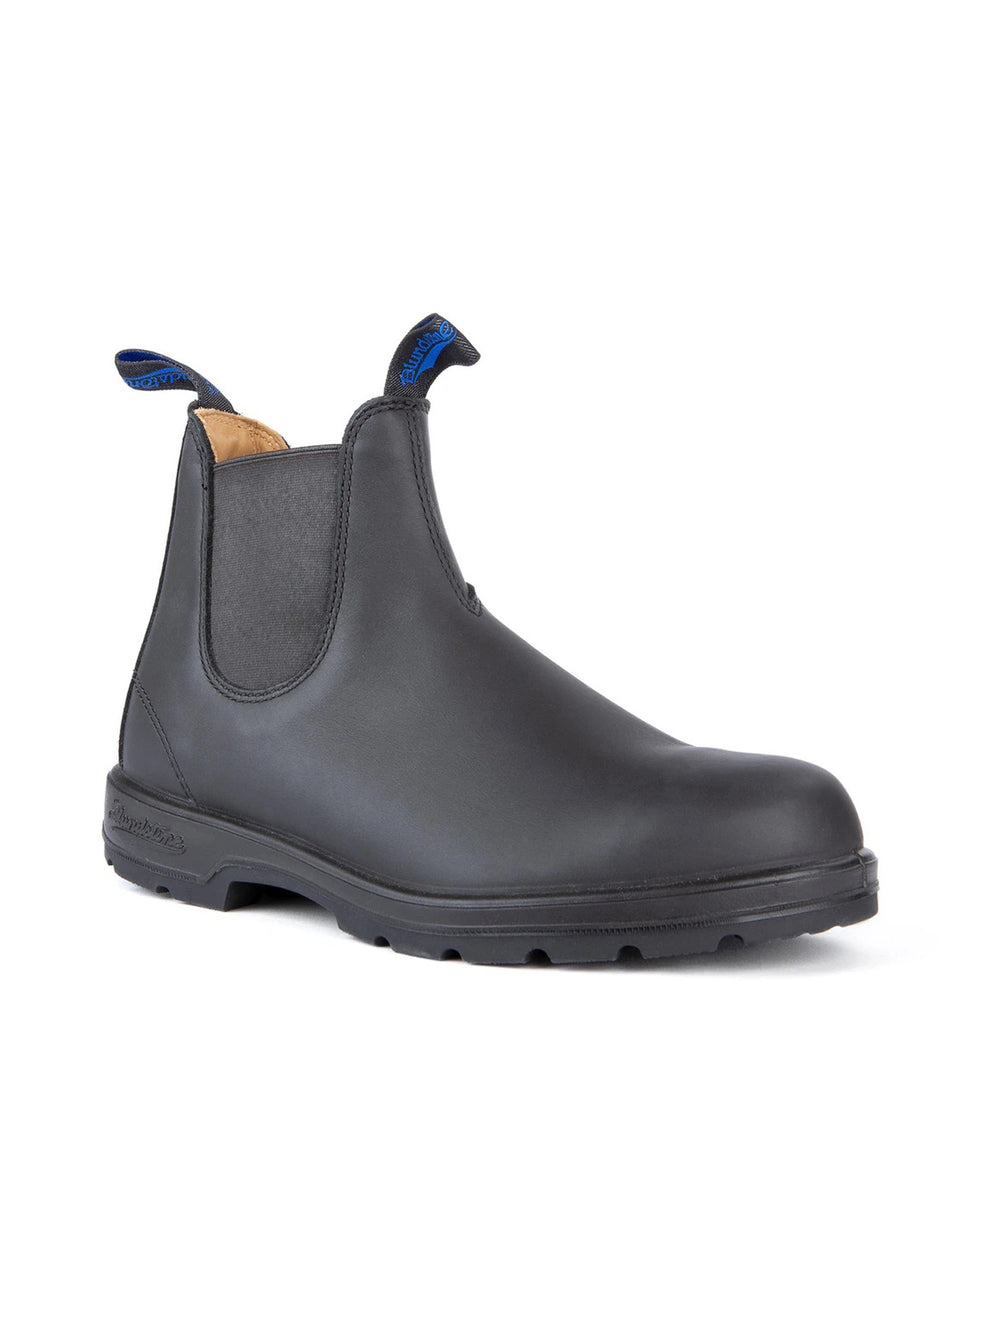 WOMENS BLUNDSTONE WINTER THERMAL CLASSIC BLACK